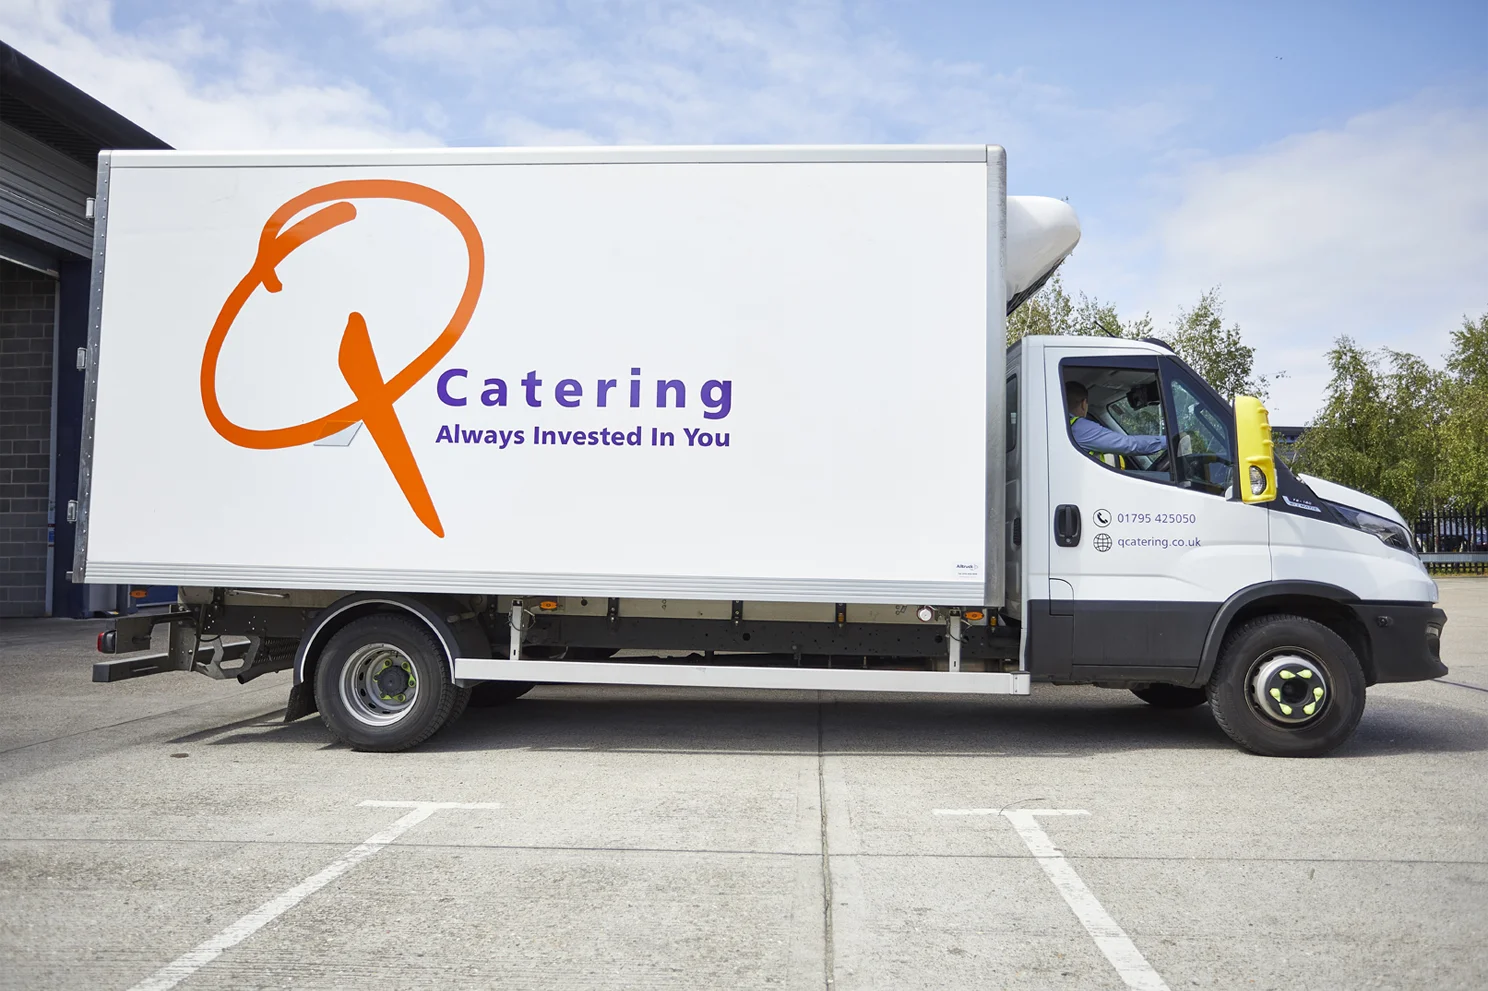 Get in touch with Q Catering today